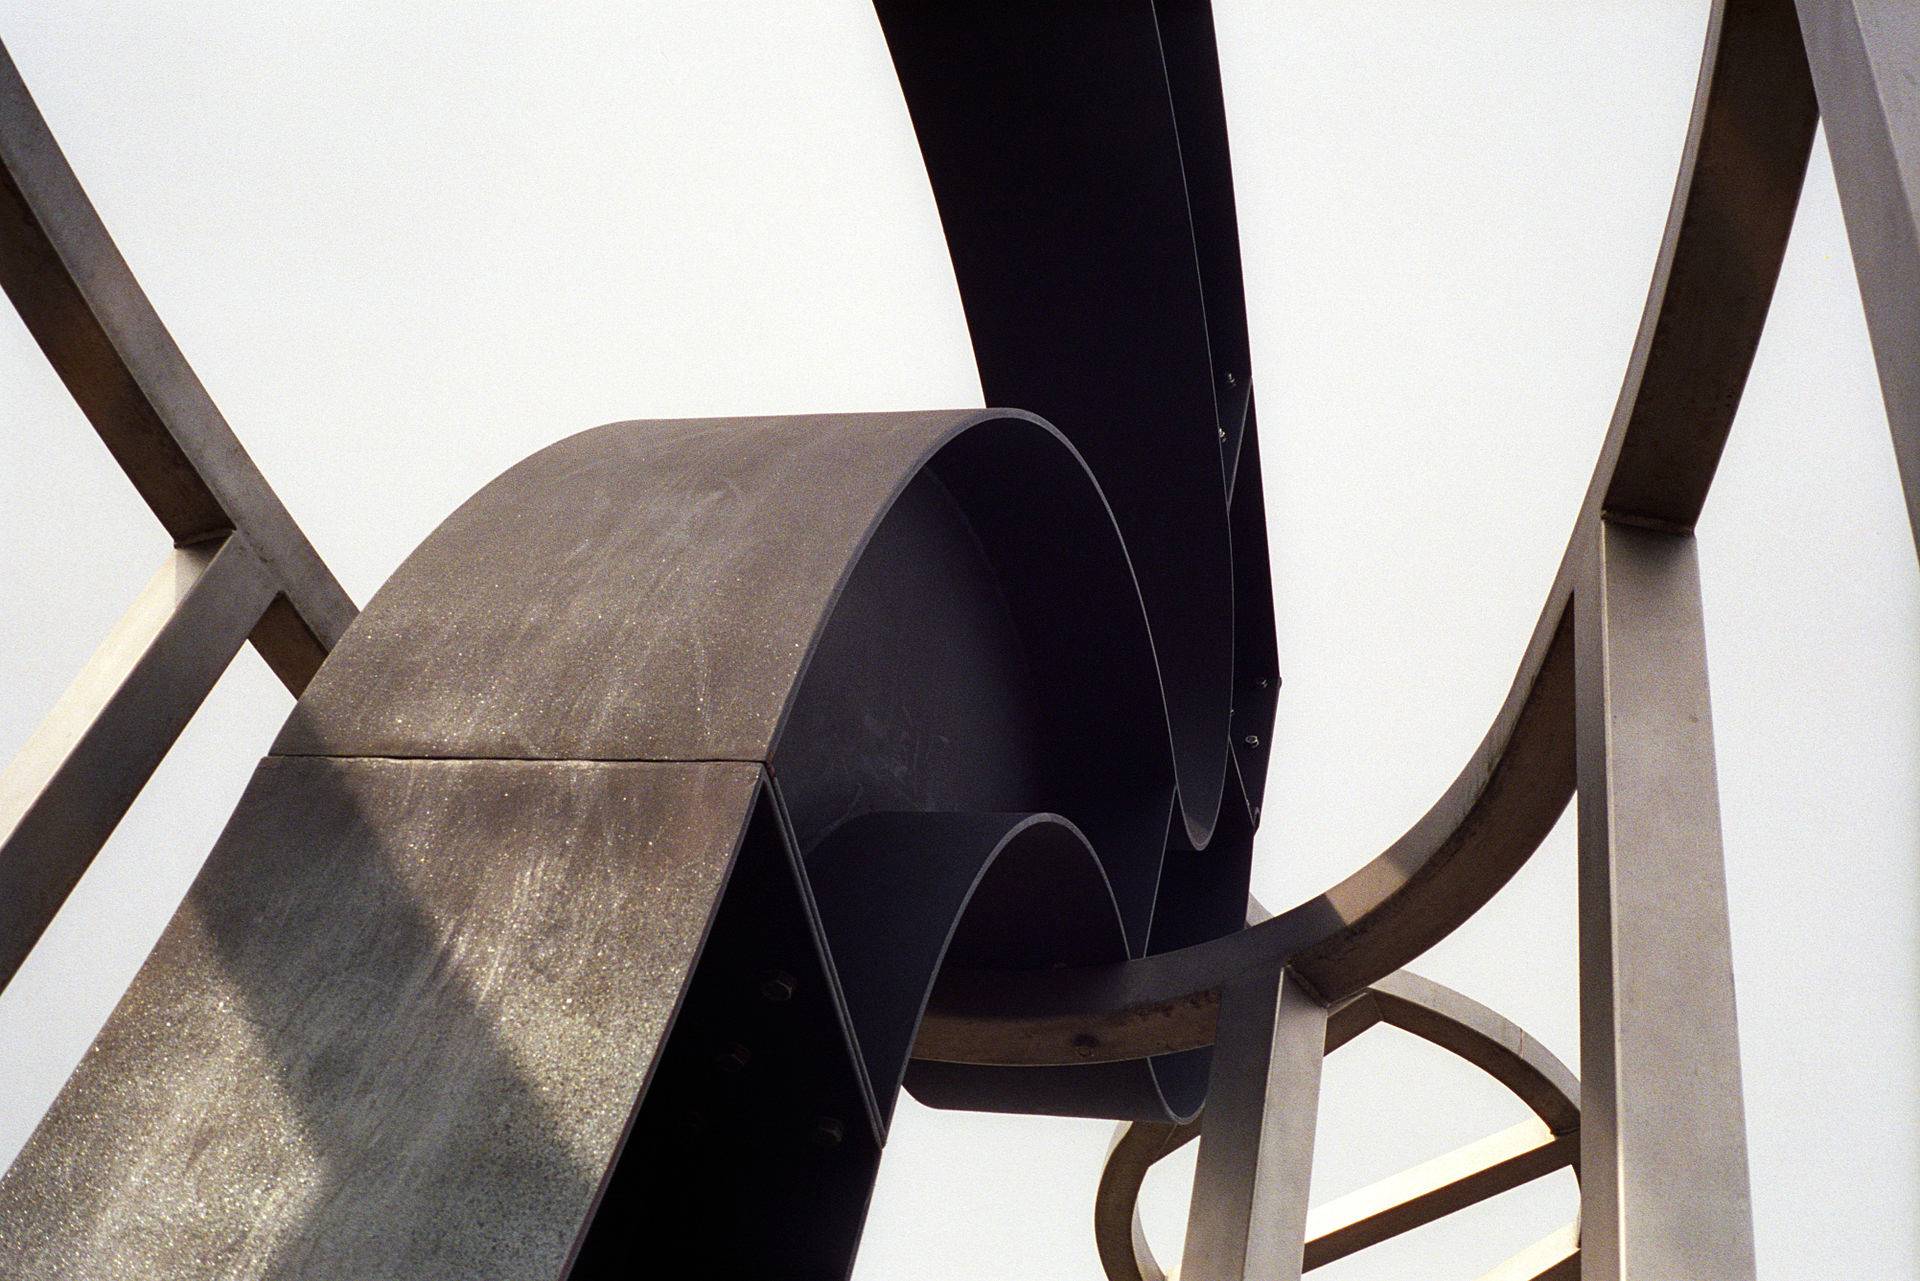 Richard Deacon. Lets Not Be Stupid (detail) at the University of Warwick